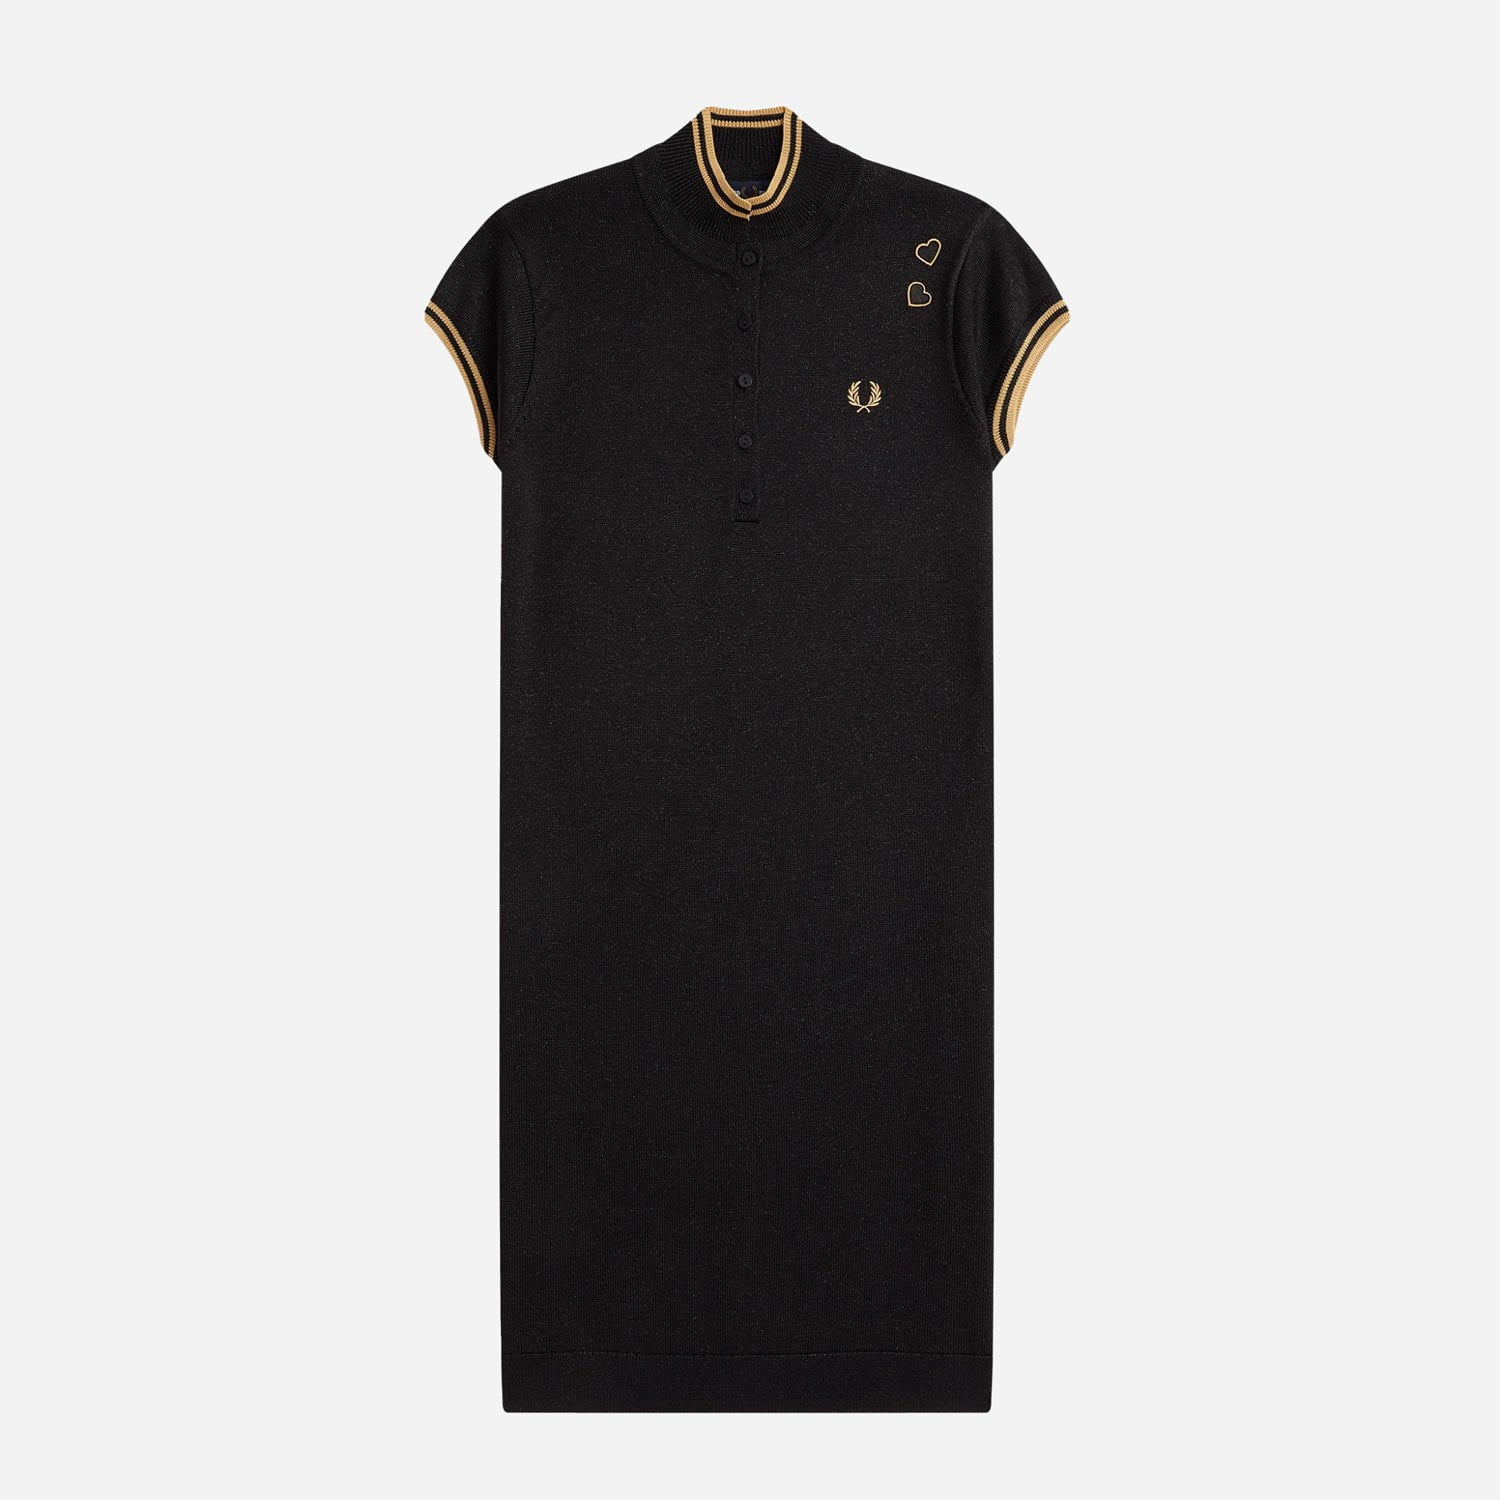 Fred Perry Women's Metallic Knitted Dress - Black